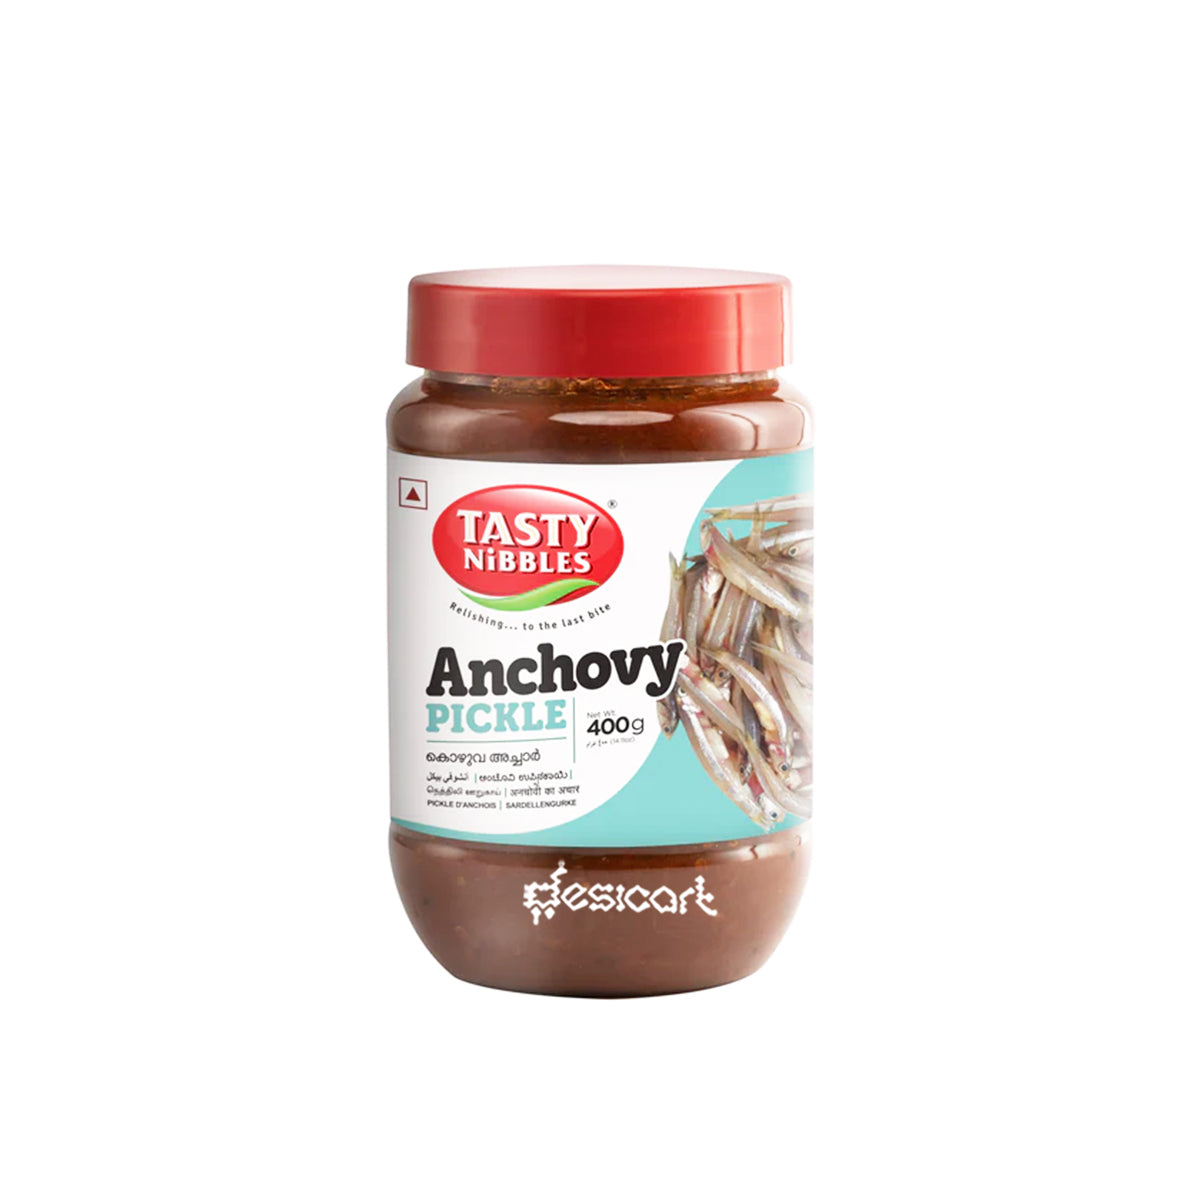 TASTY NIBBLES ANCHOVY PICKLE 400G